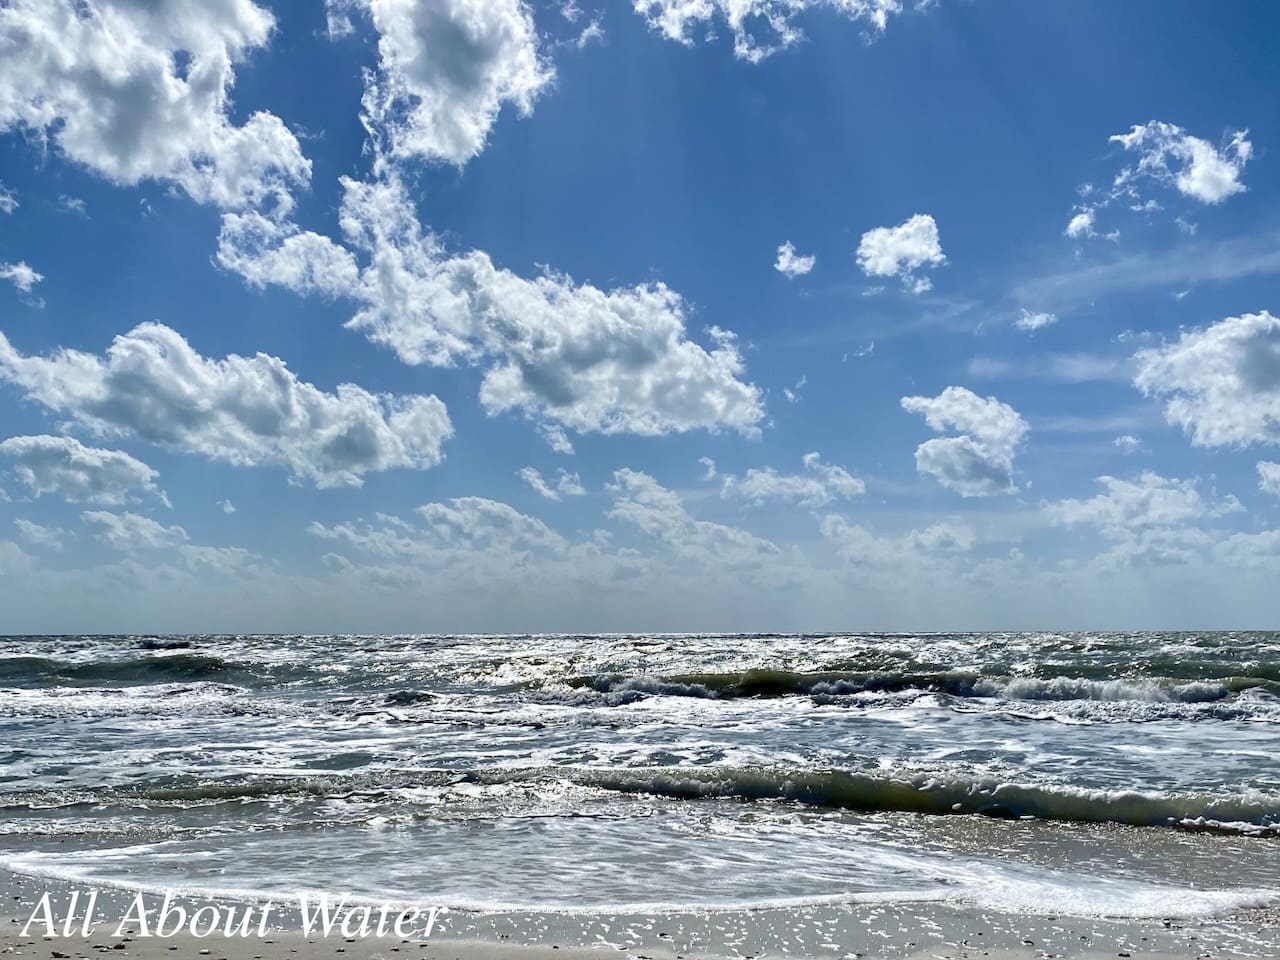 Blue sky, white clouds, and ocean waves.